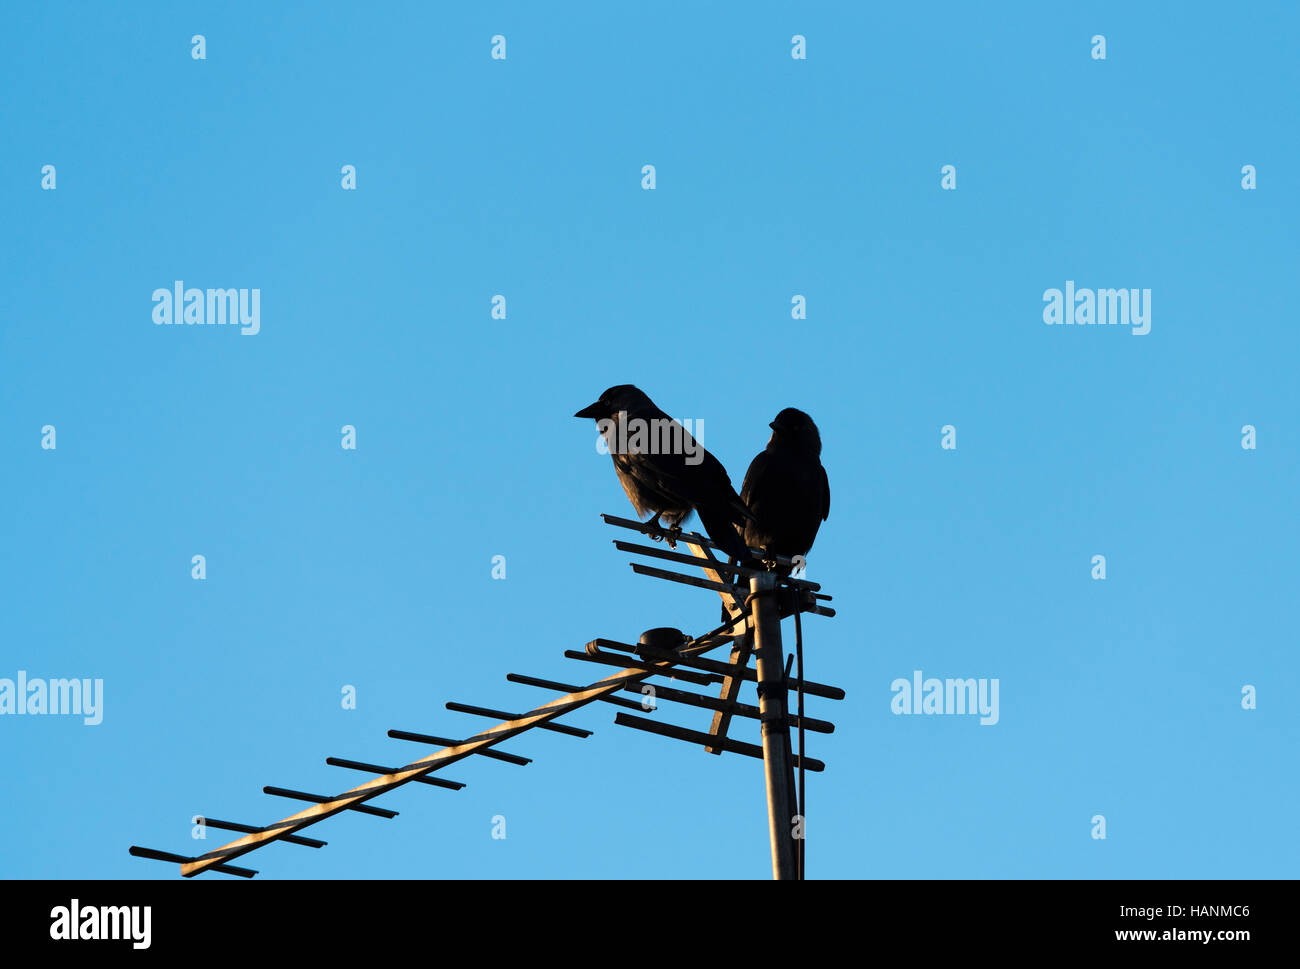 Two Carrion crows on TV aerial in setting sun Stock Photo